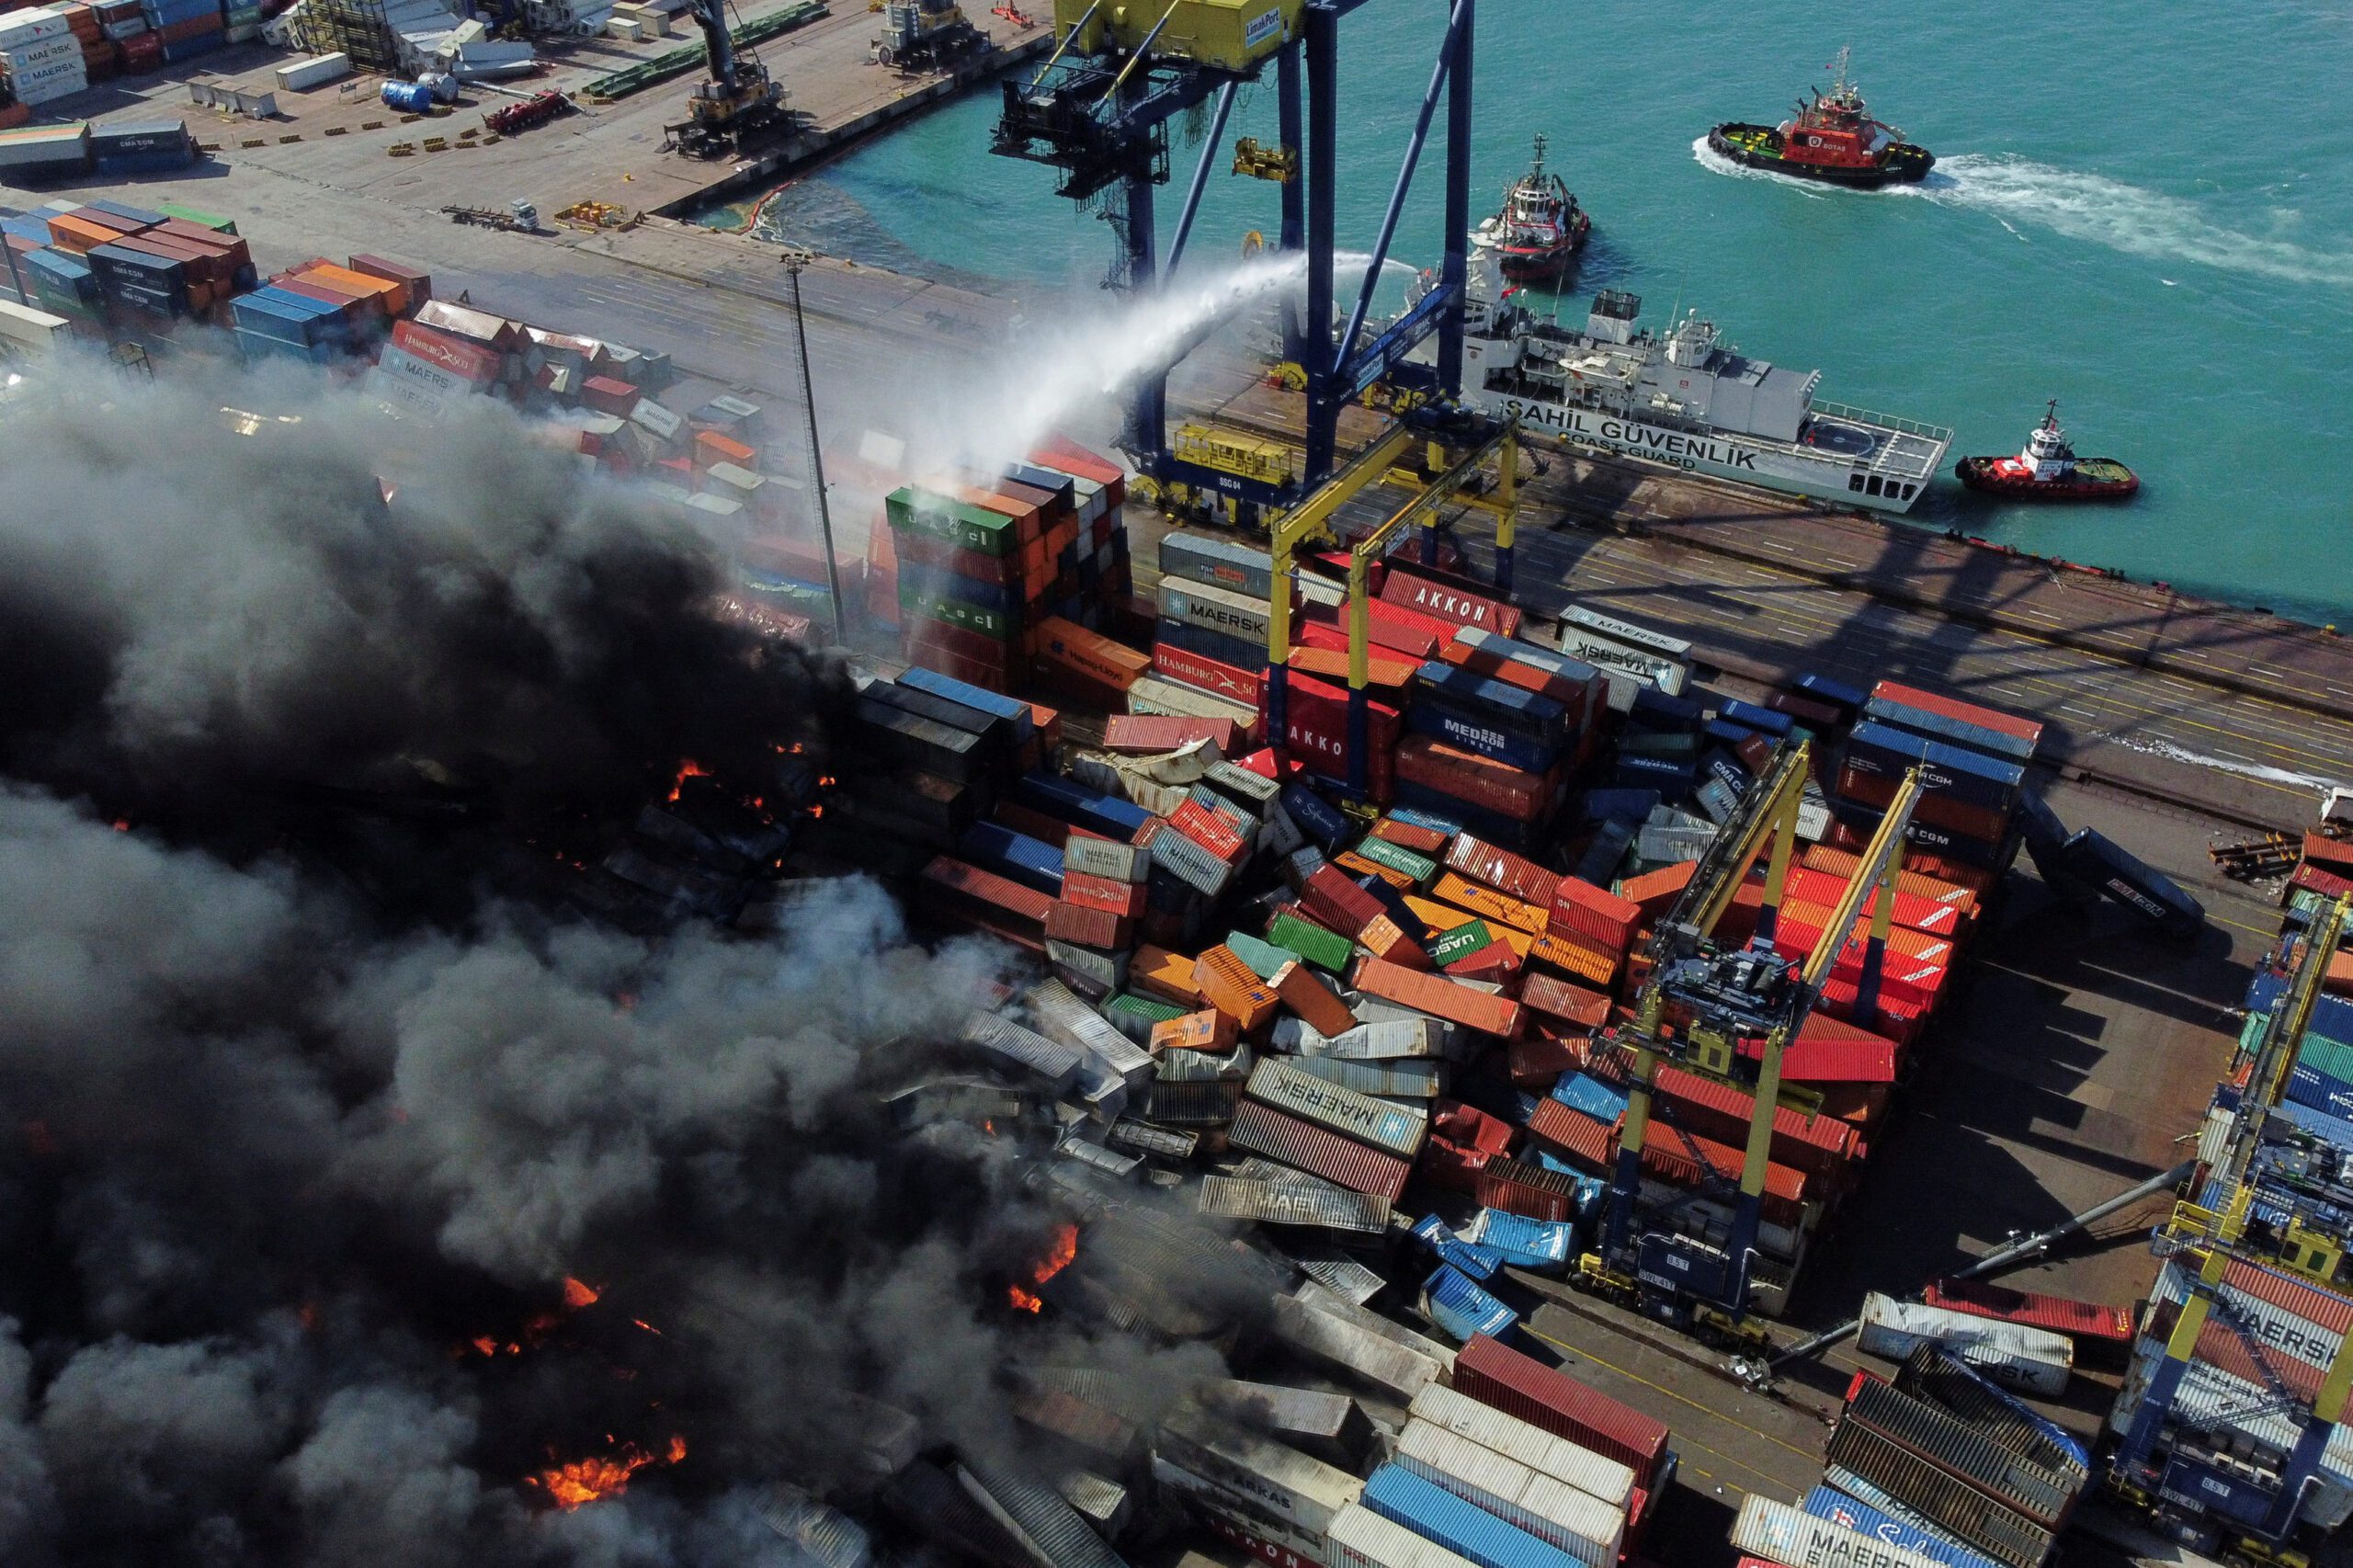 Fire Extinguished at Turkey’s Iskenderun Port, Defense Ministry Says